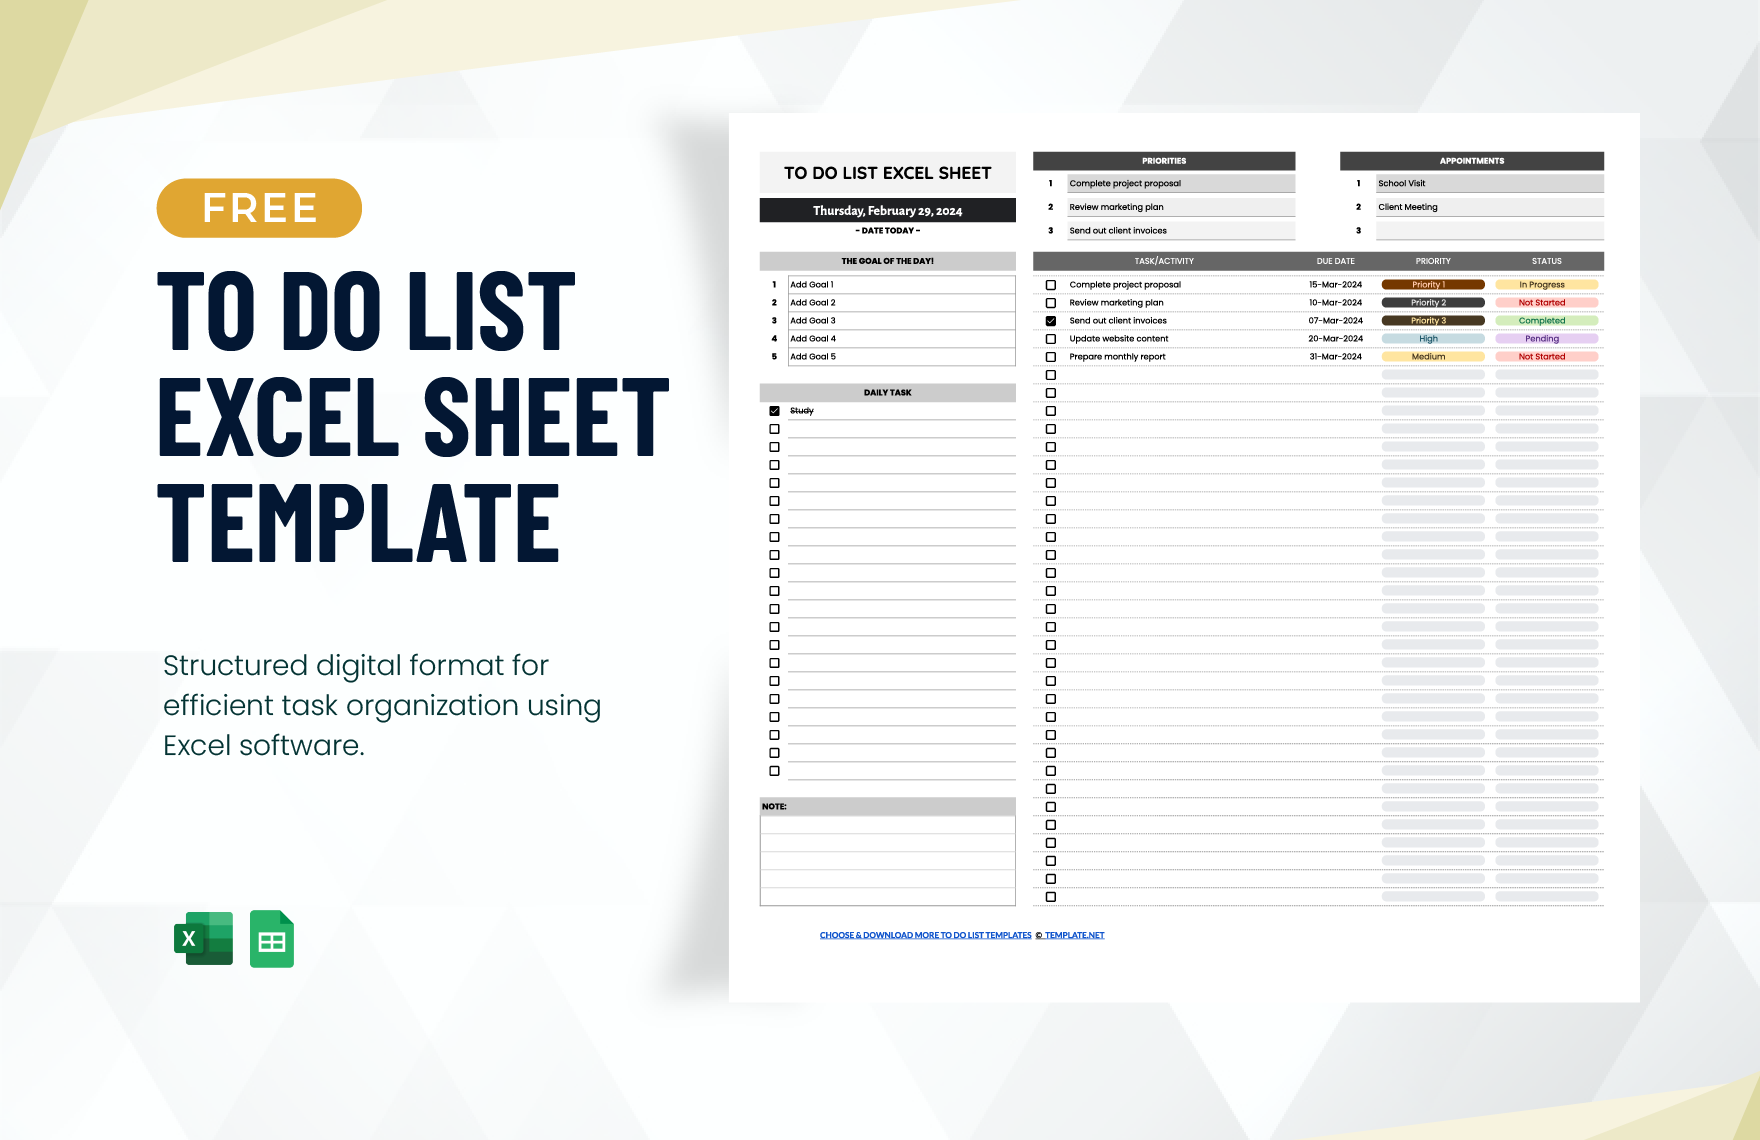 To Do List Excel Sheet Template